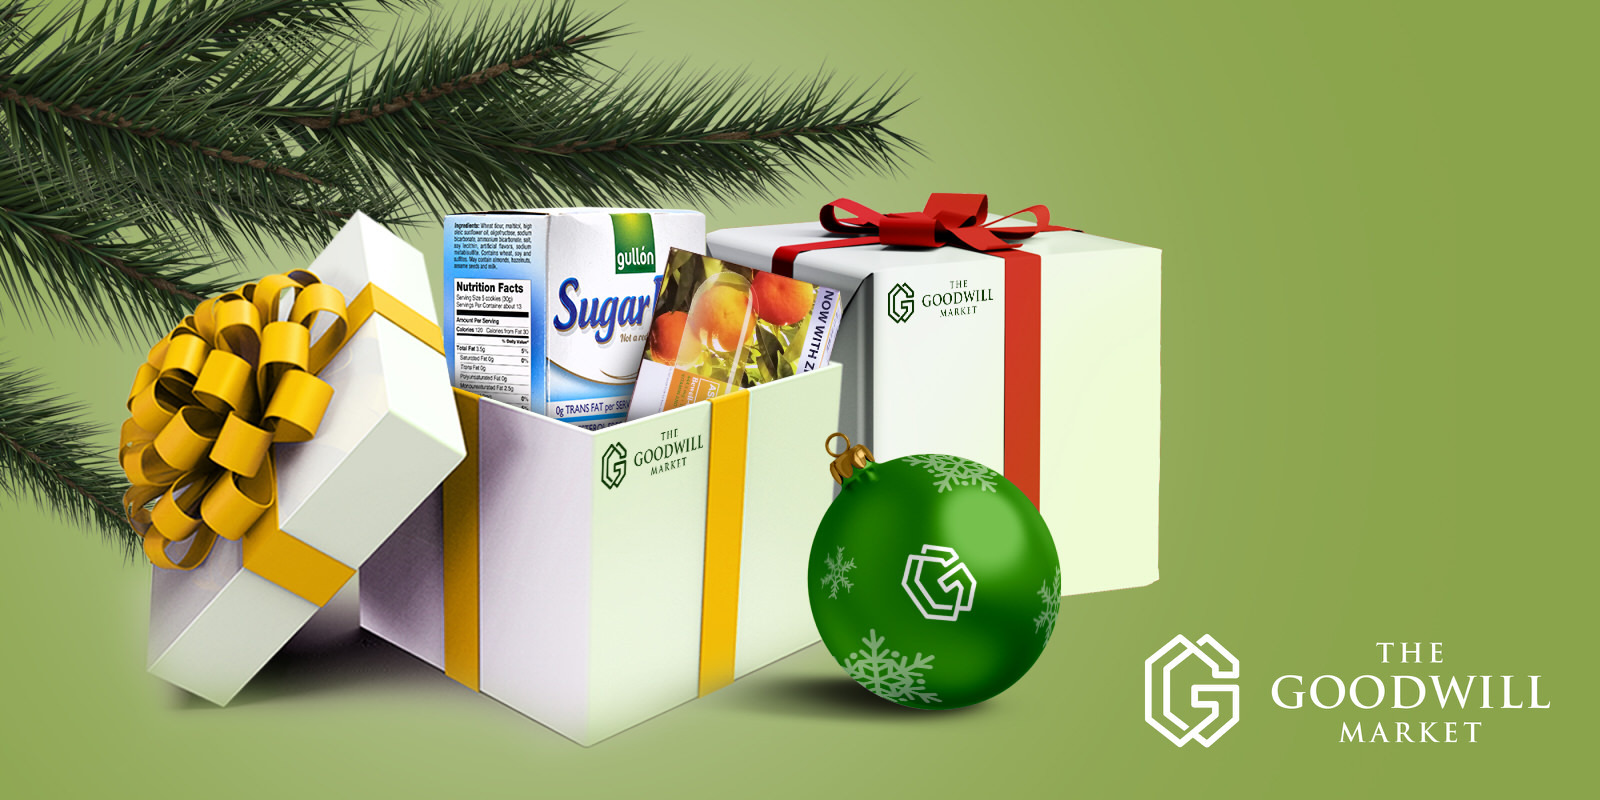 https://goodwill.market/assets/site/How_To_Make_A_Christmas_Care_Package_3.jpg